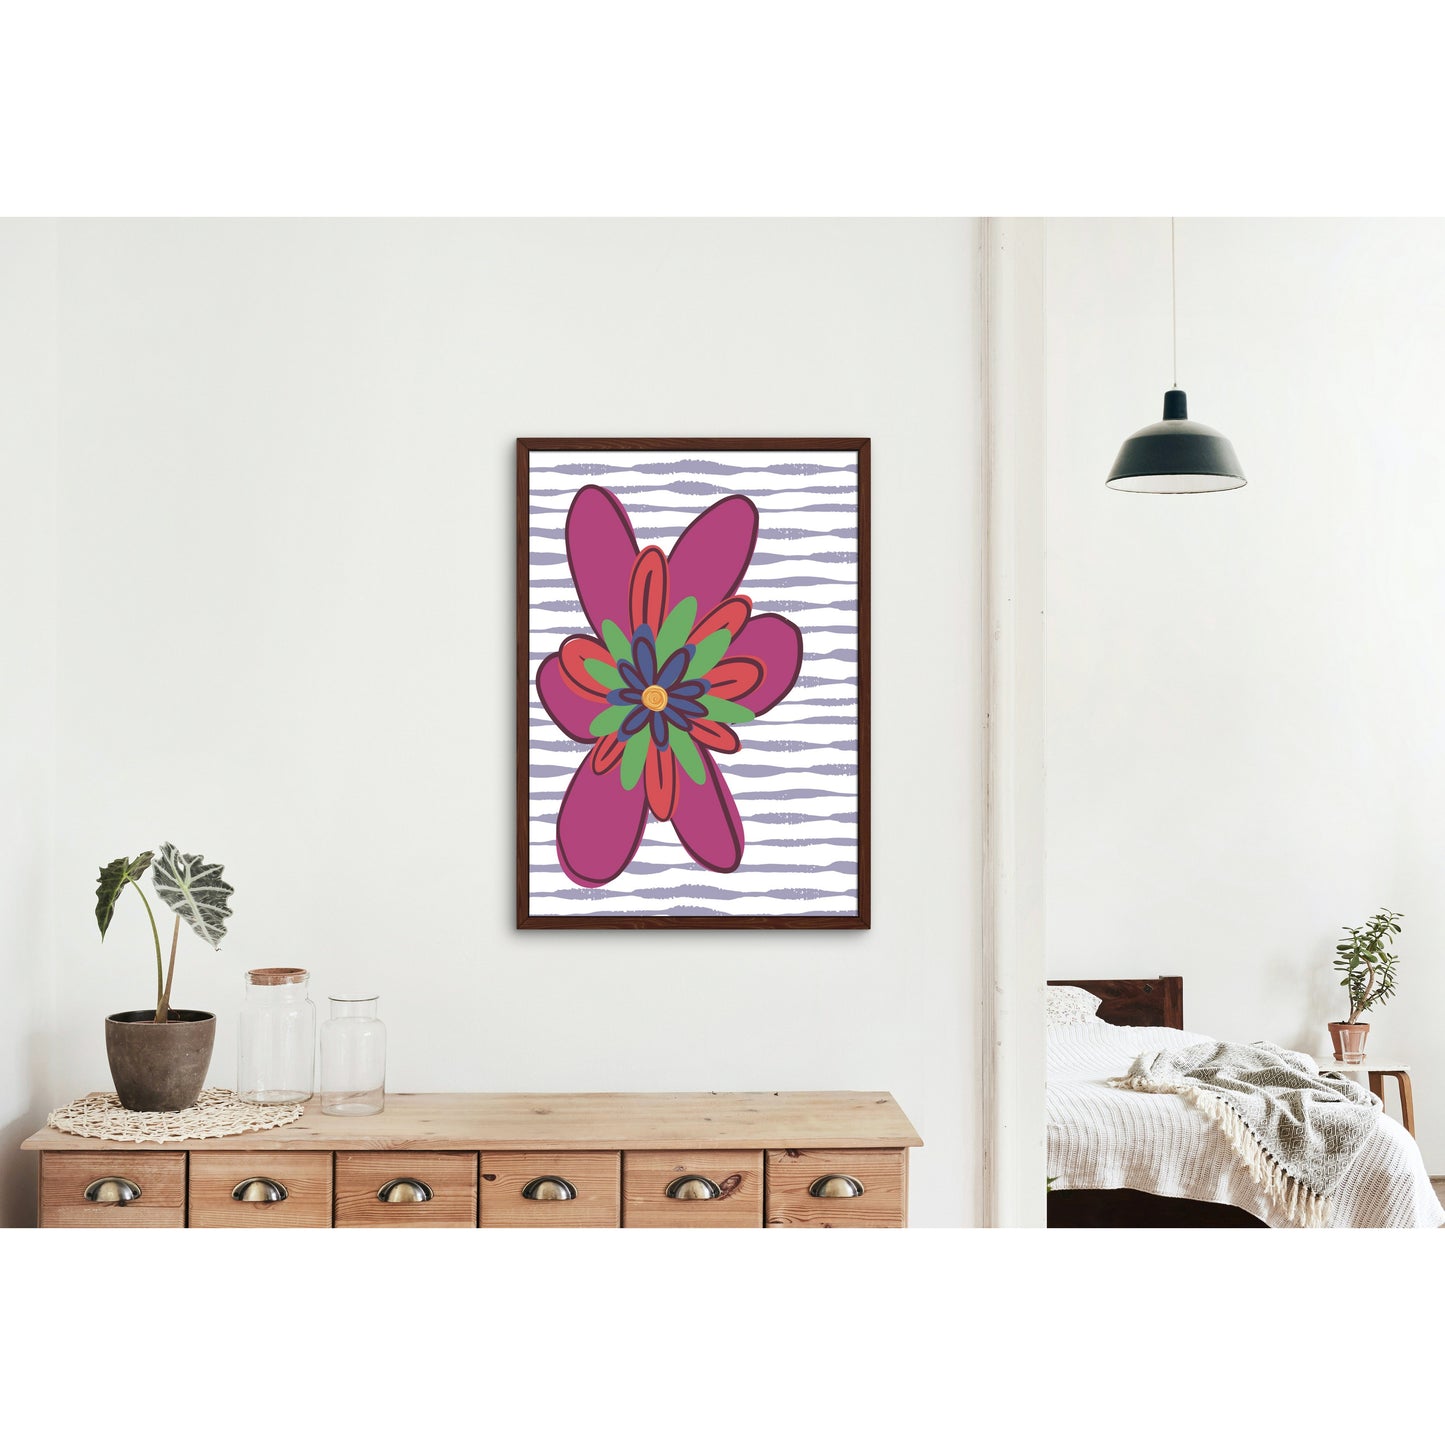 This Colourful Flower Art Print is perfect for anyone who wants to add a touch of personality and quirkiness to their home décor. The bold and brightly coloured flower stands out against the purple stripe background, making it a real eye-catcher.